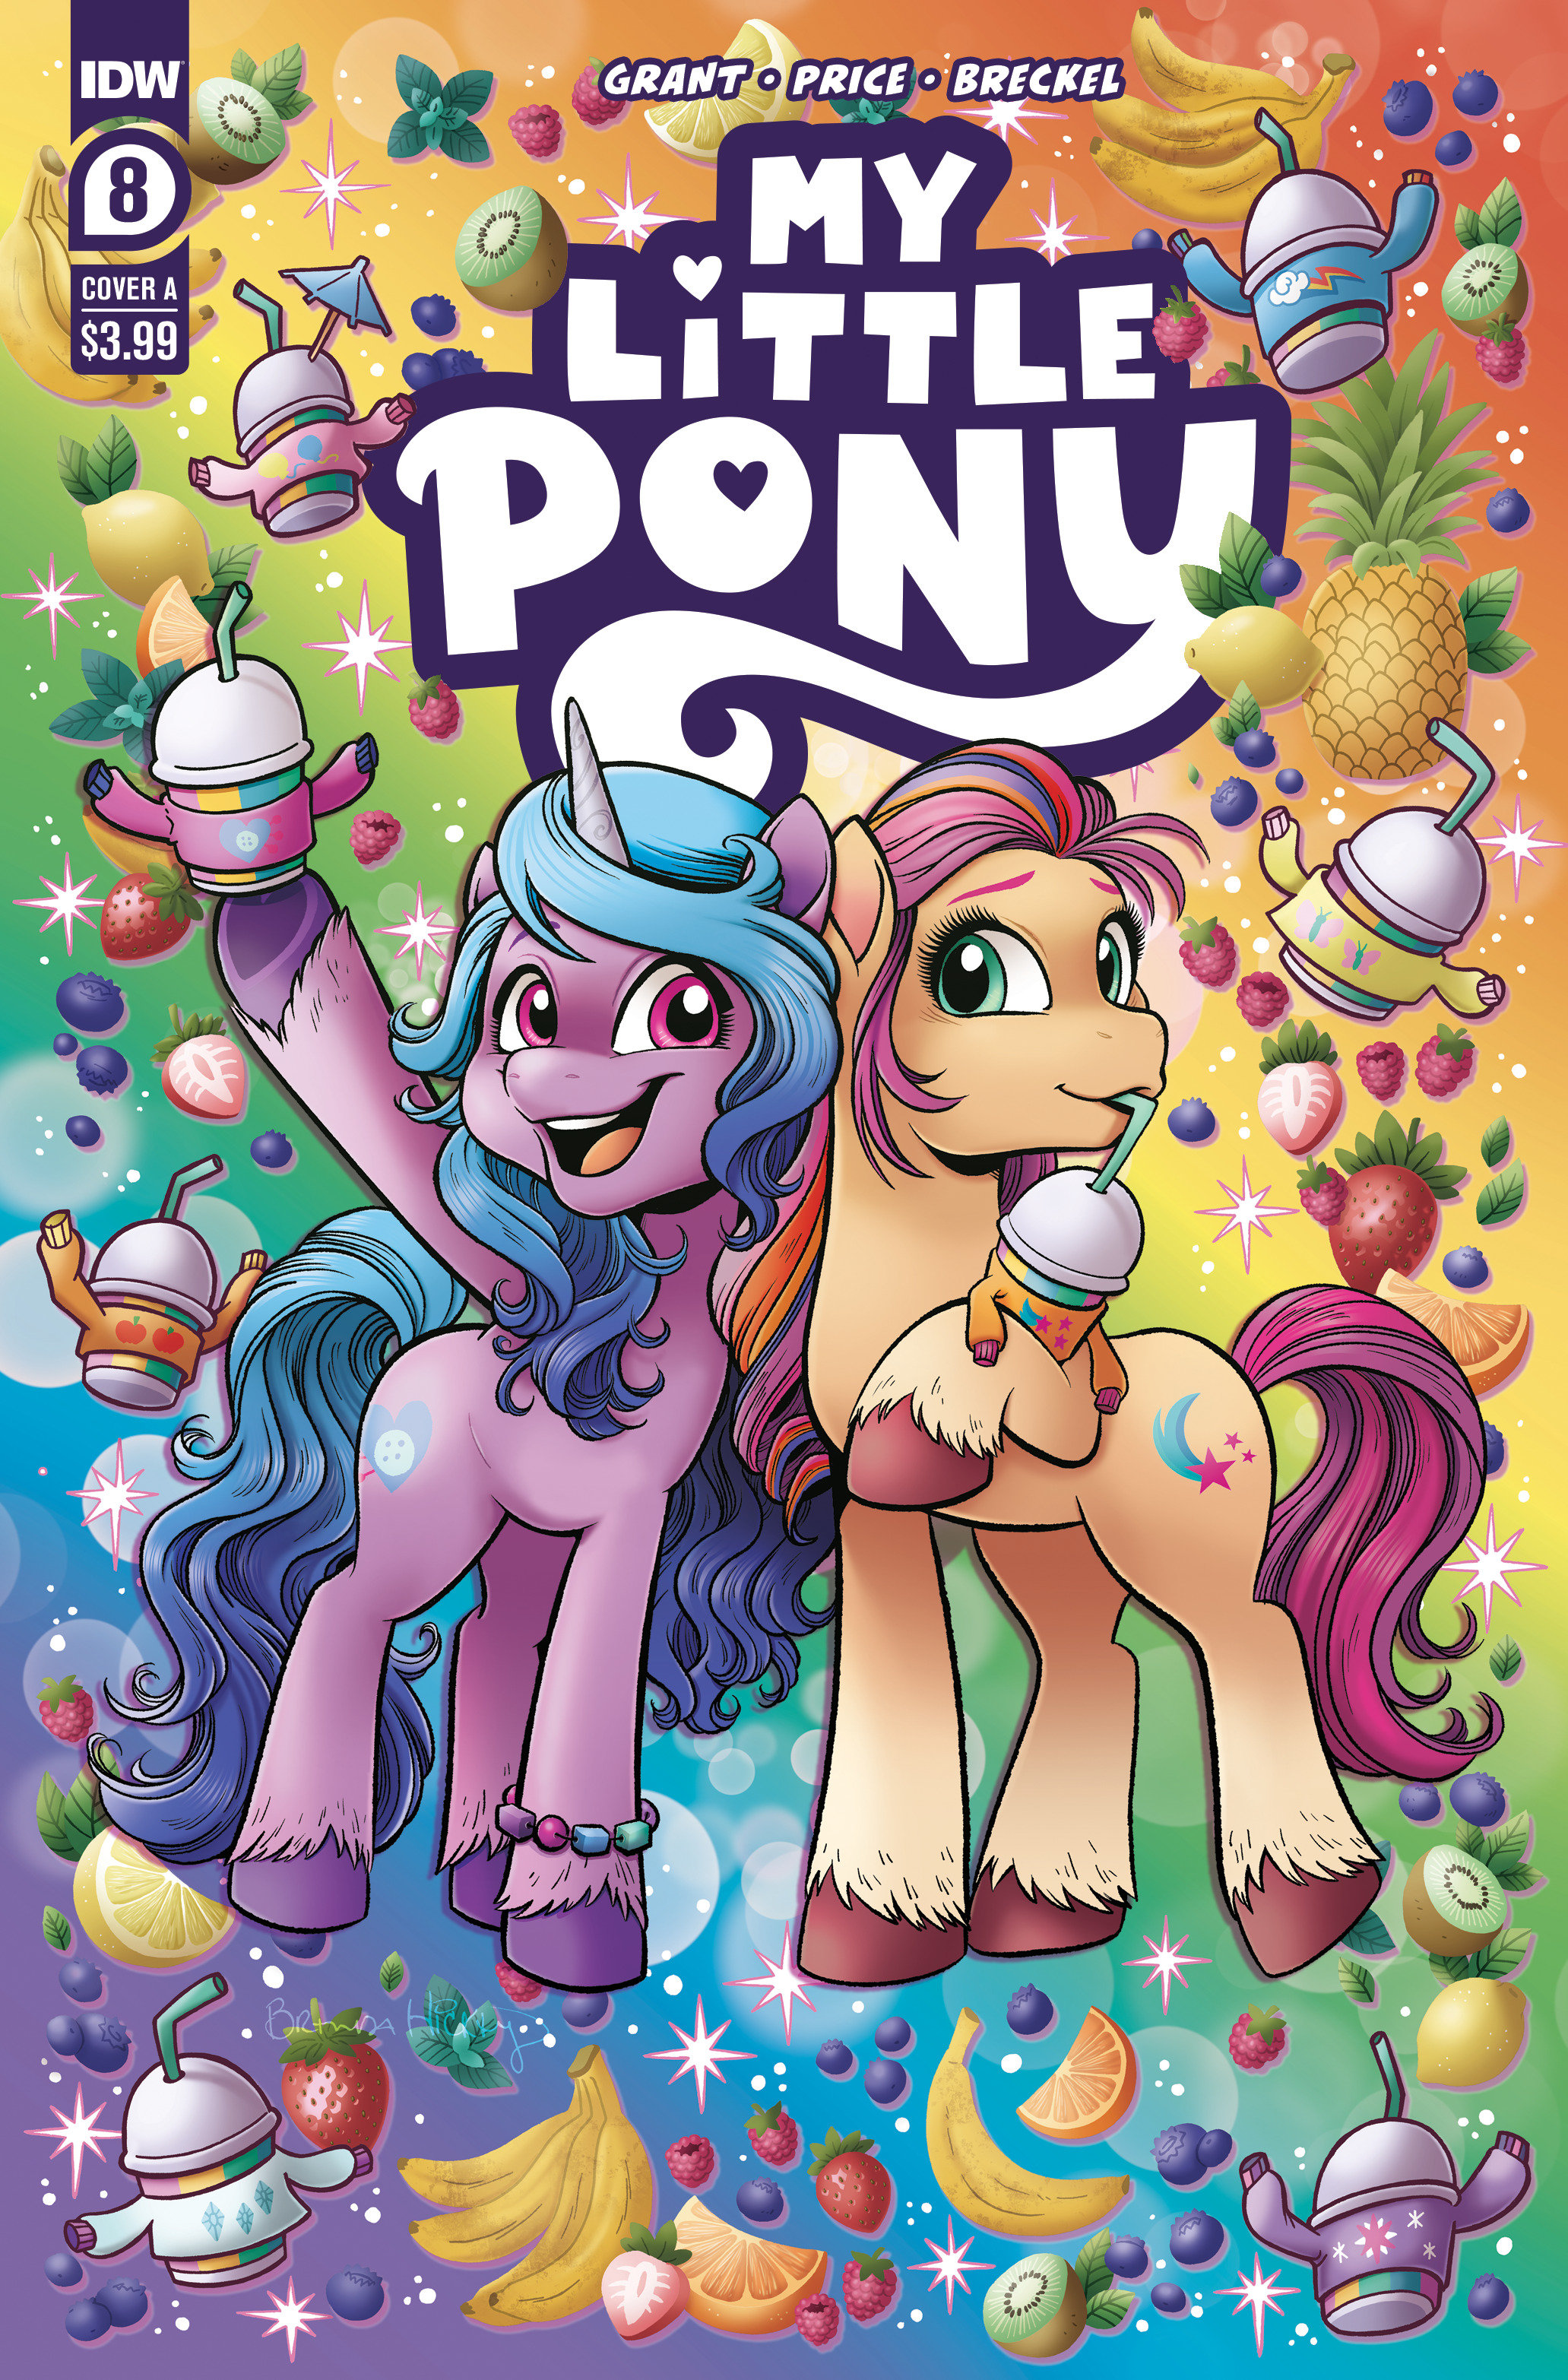 List of My Little Pony comics issued by IDW Publishing - Wikipedia